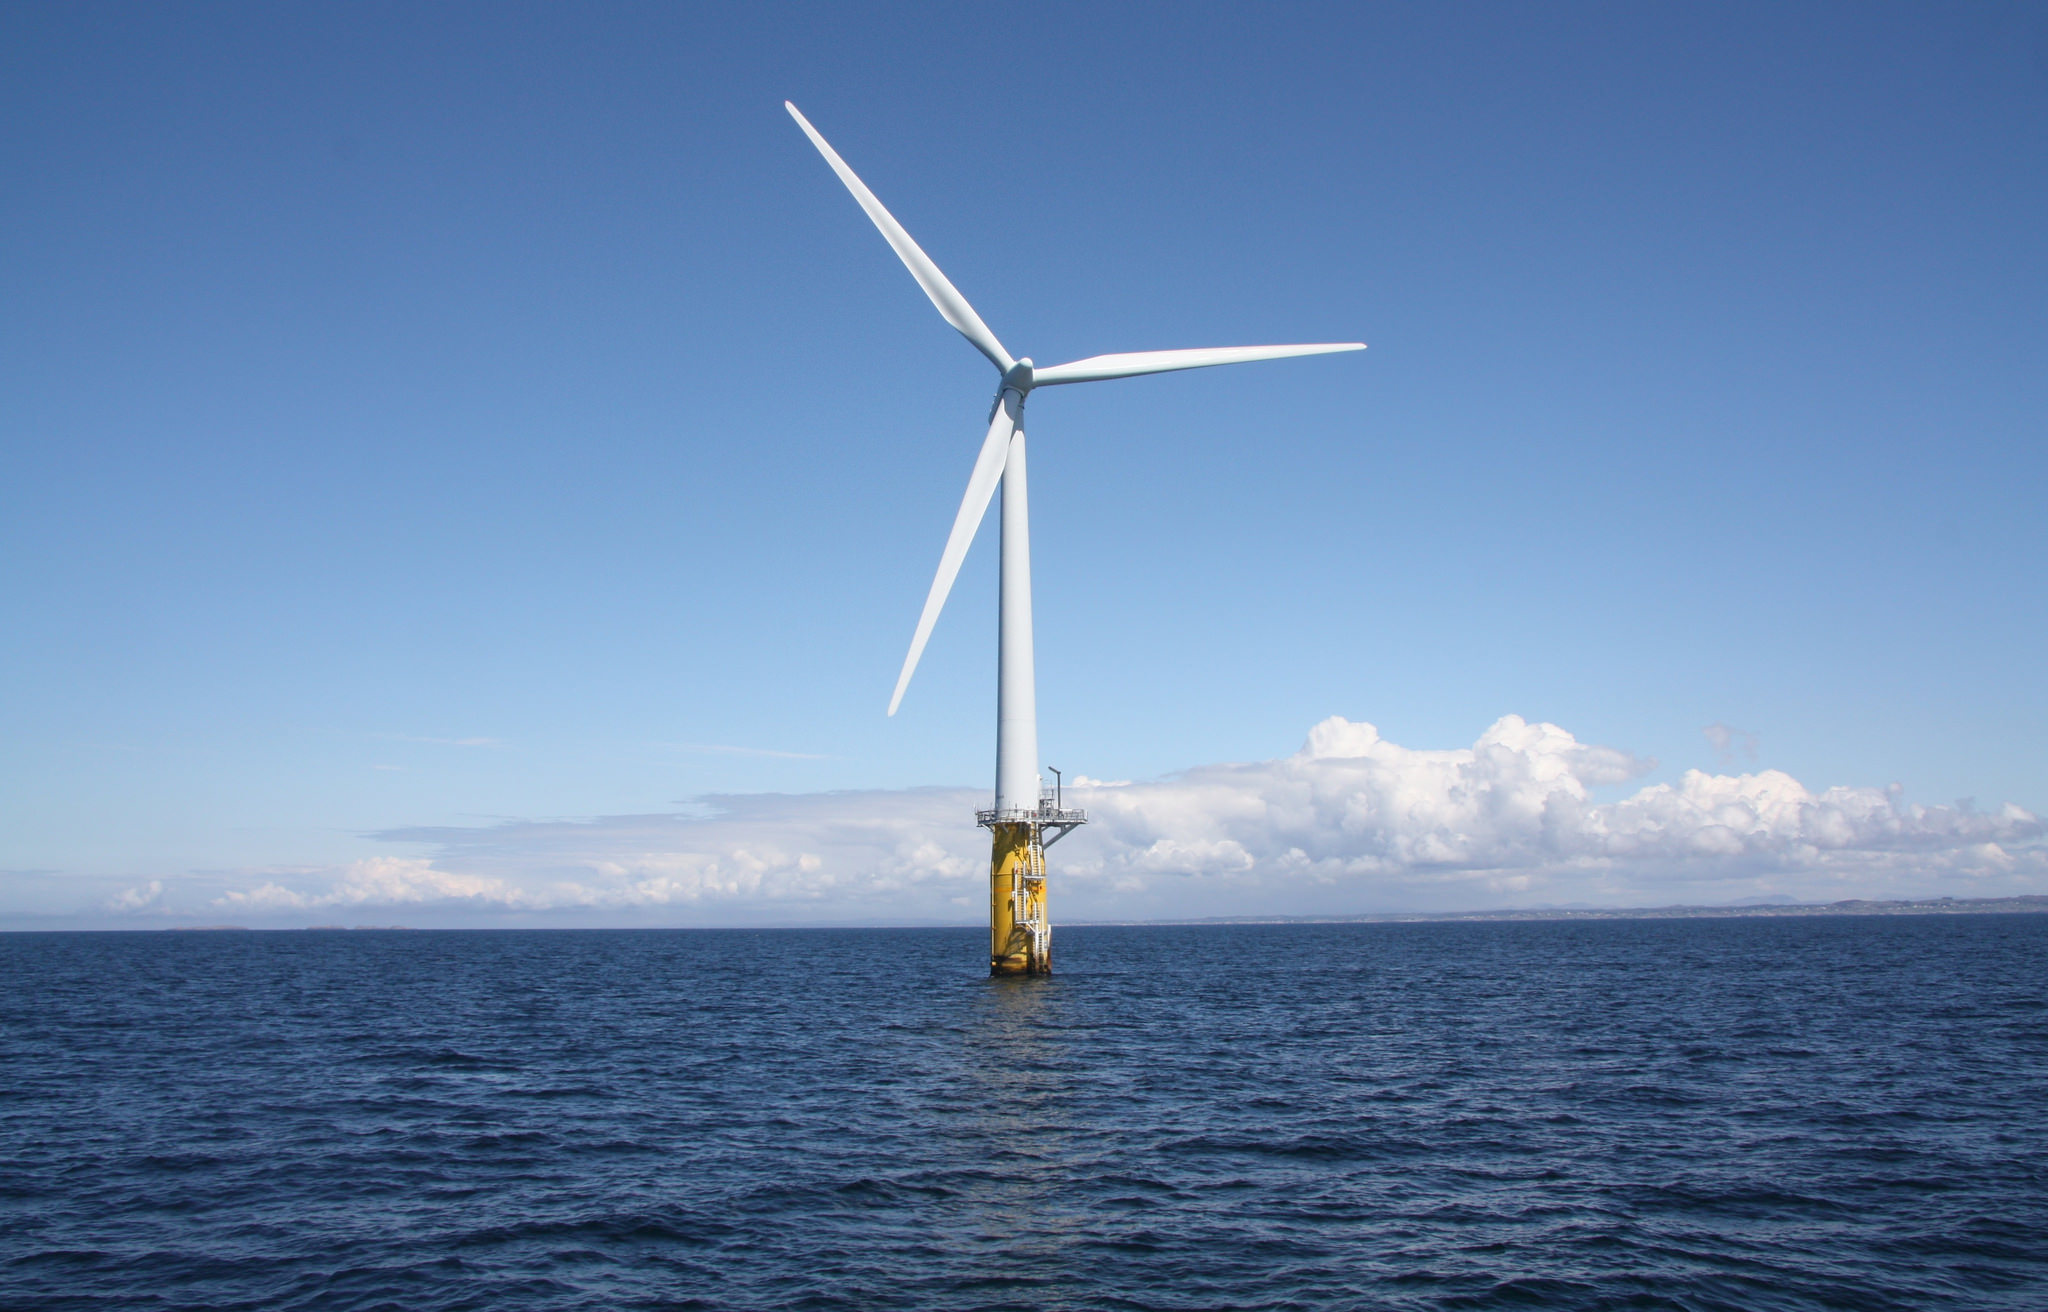 New report says offshore wind farms can interfere with vessel radar